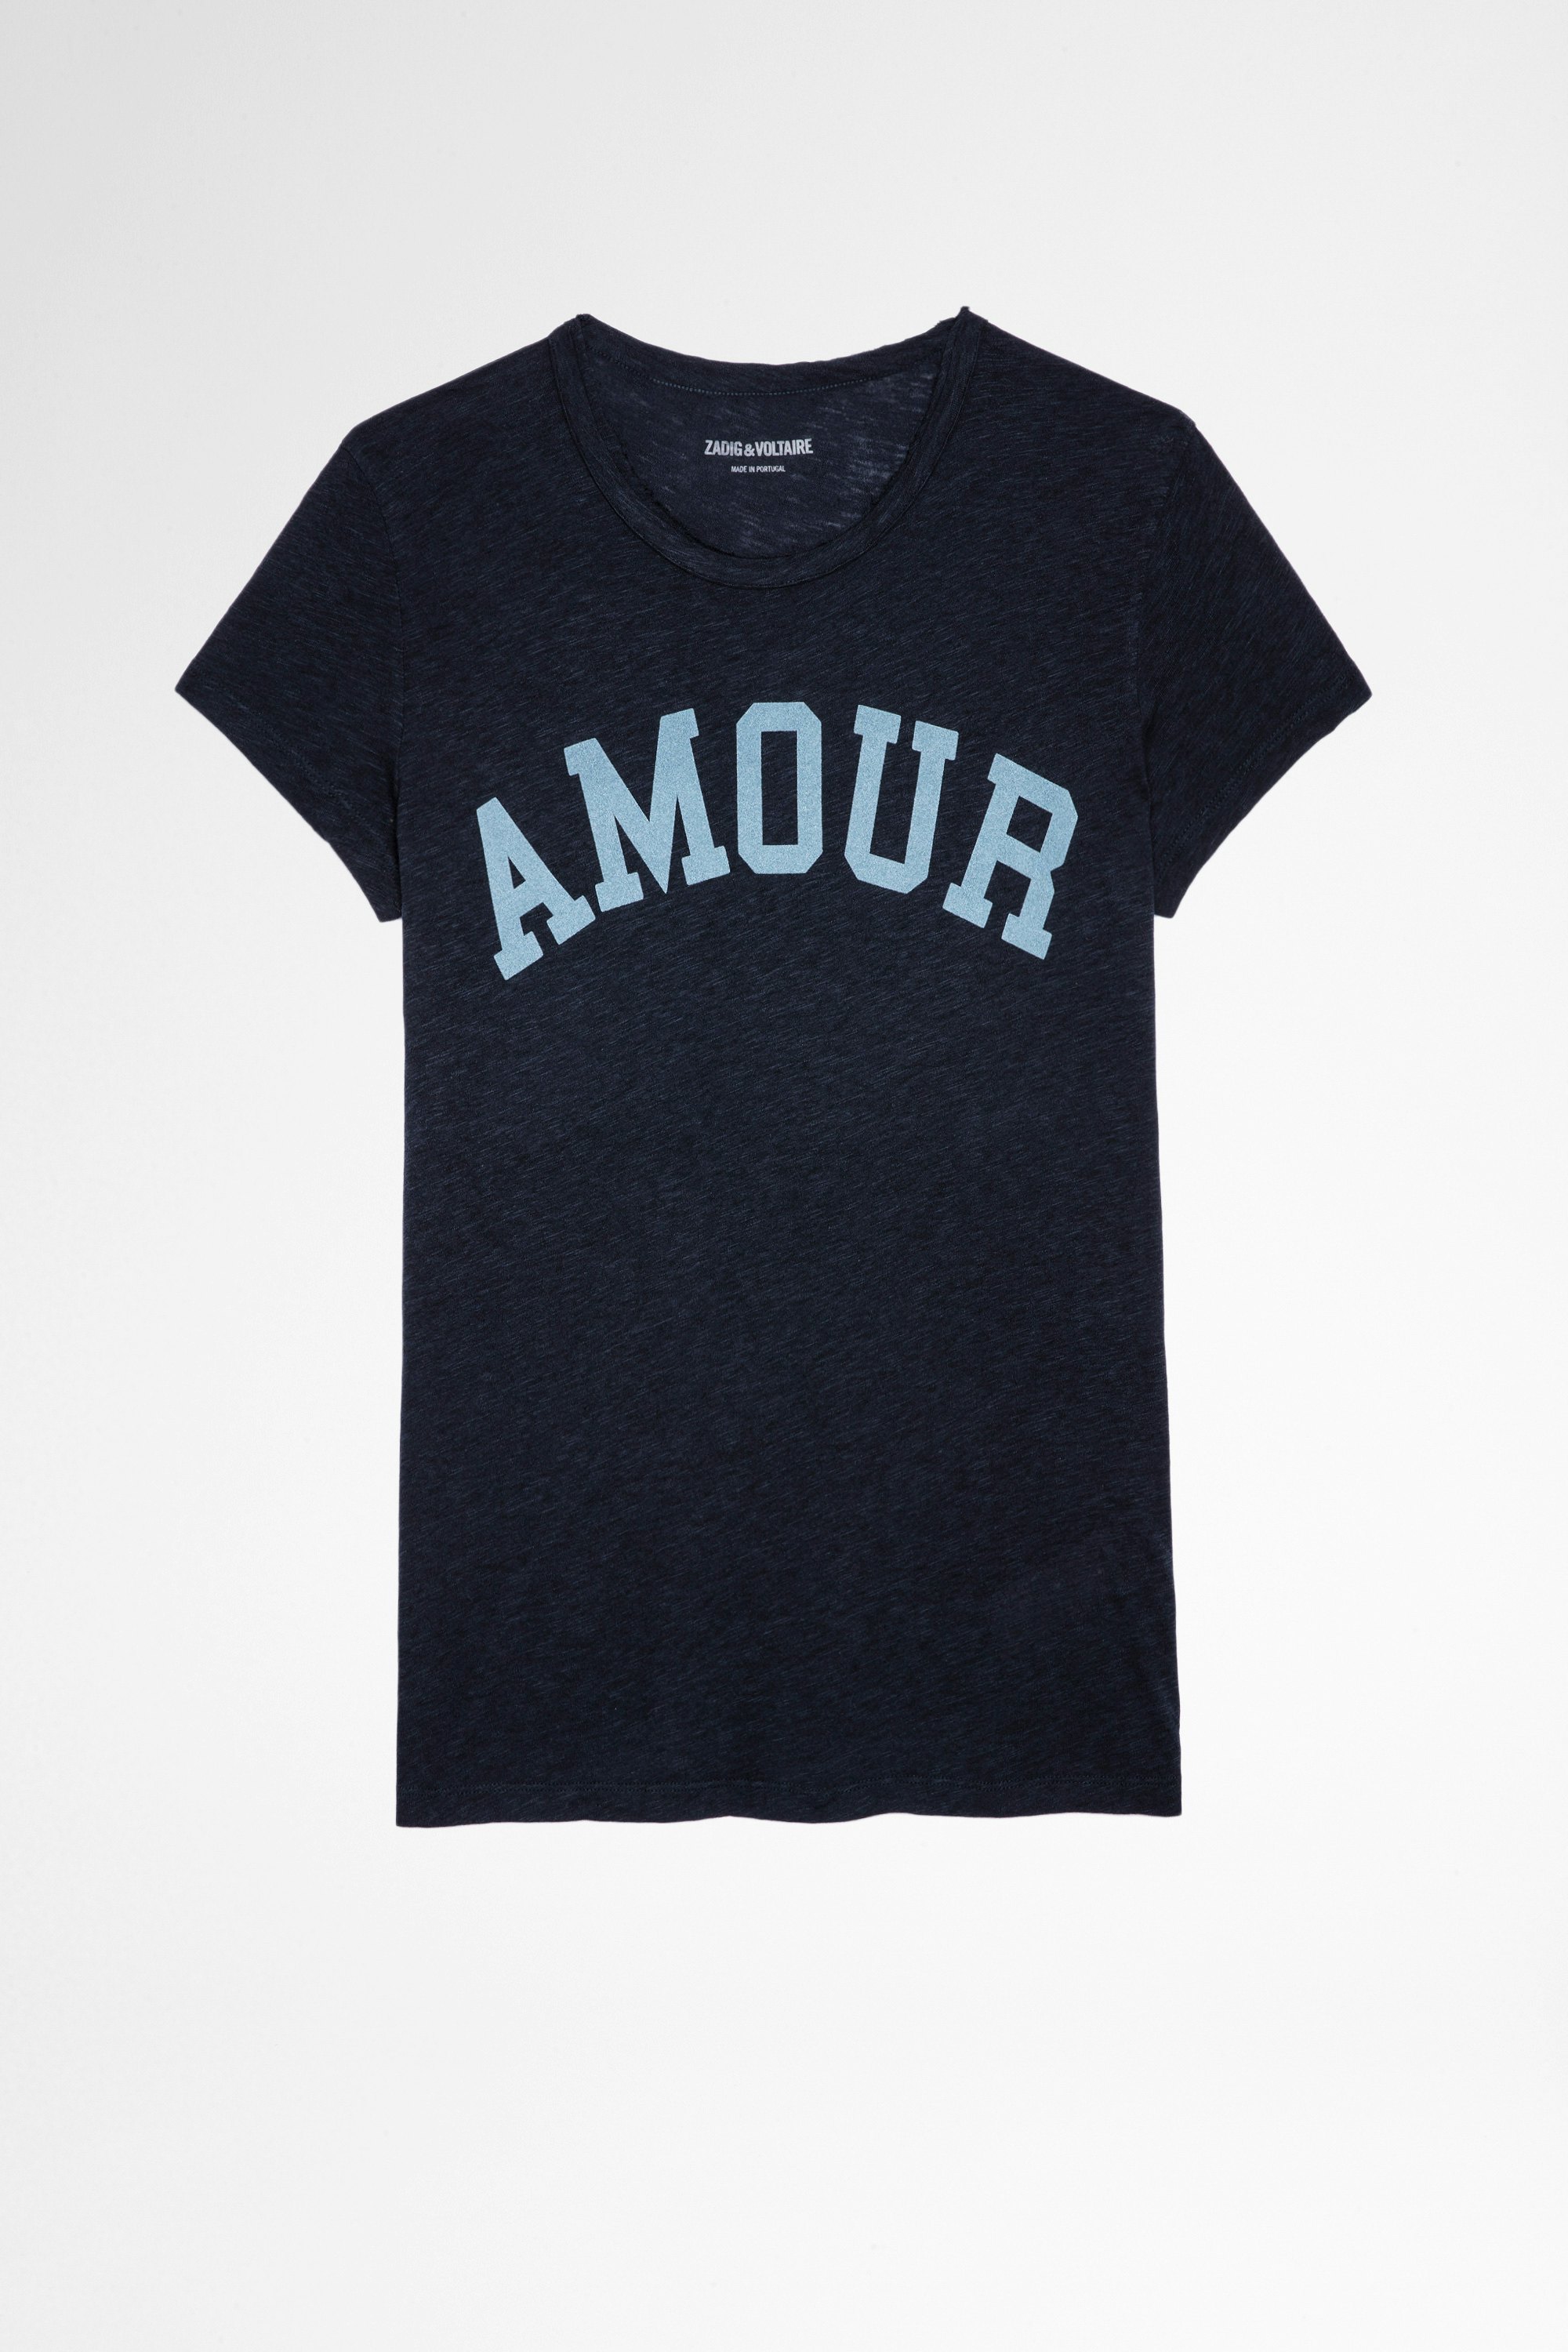 Walk Amour Ｔシャツ Women's cotton and viscose t-shirt in navy blue 